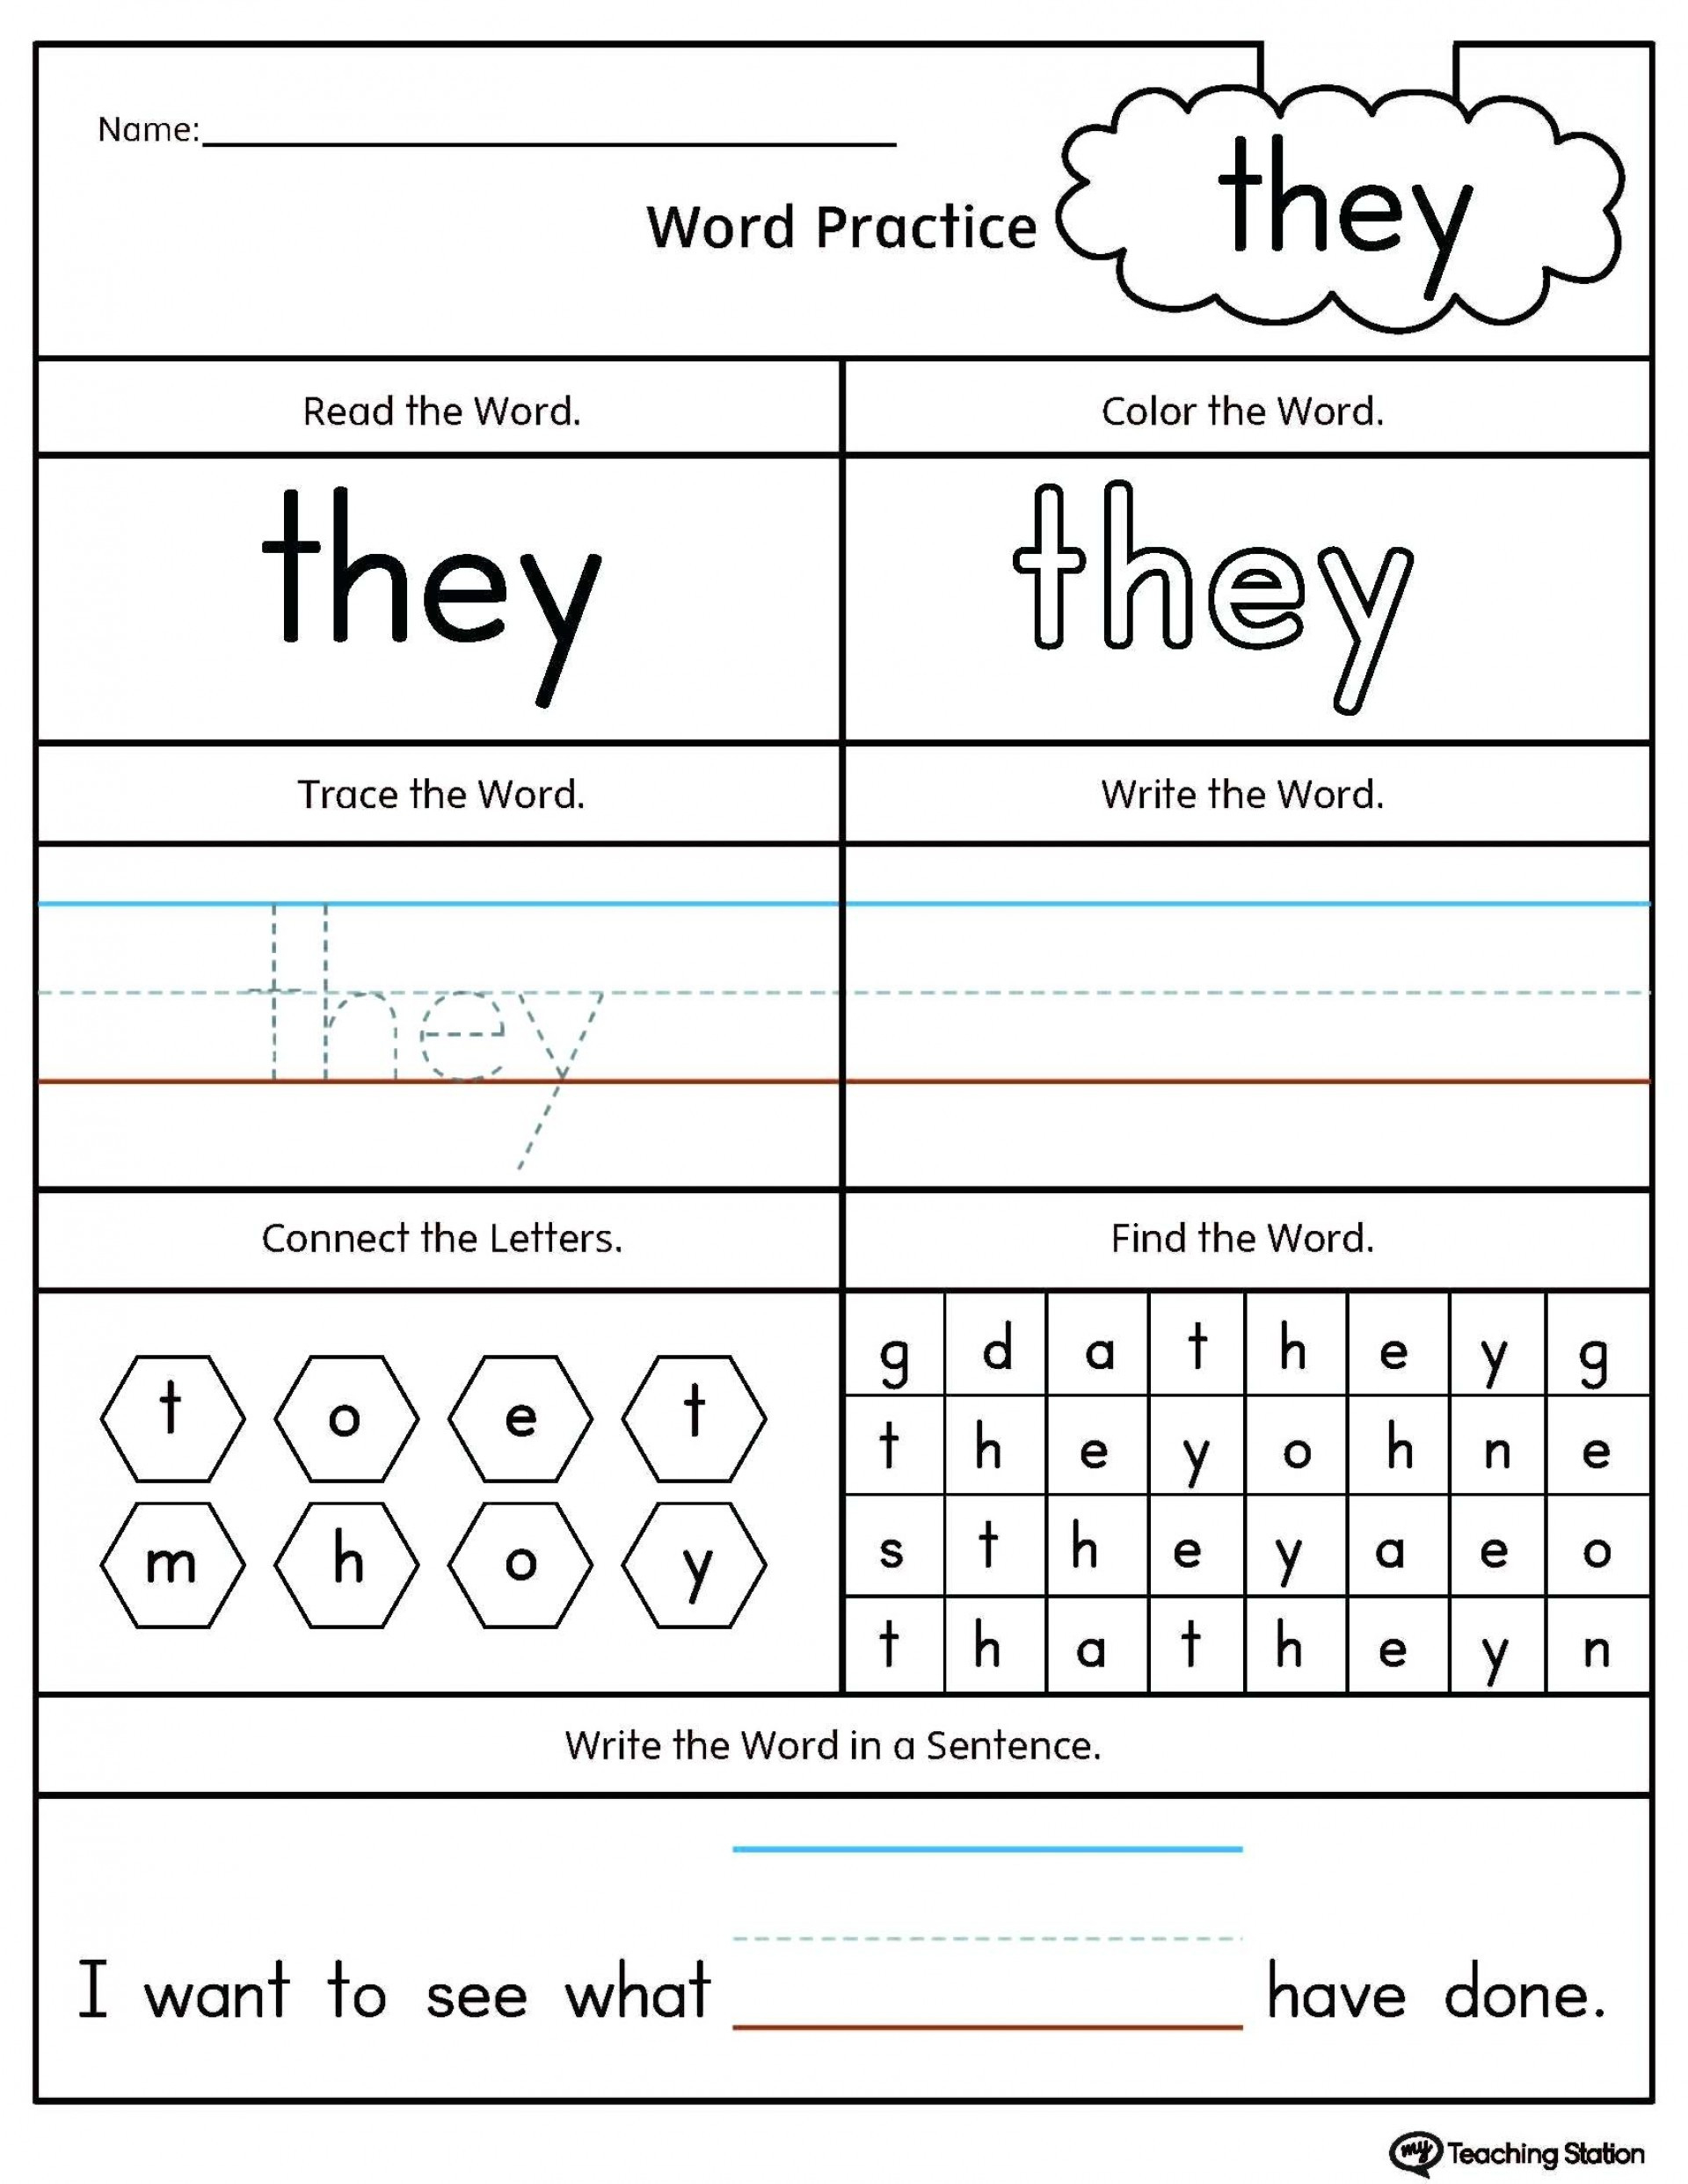 dolch-kindergarten-sight-word-worksheets-made-by-teachers-printable